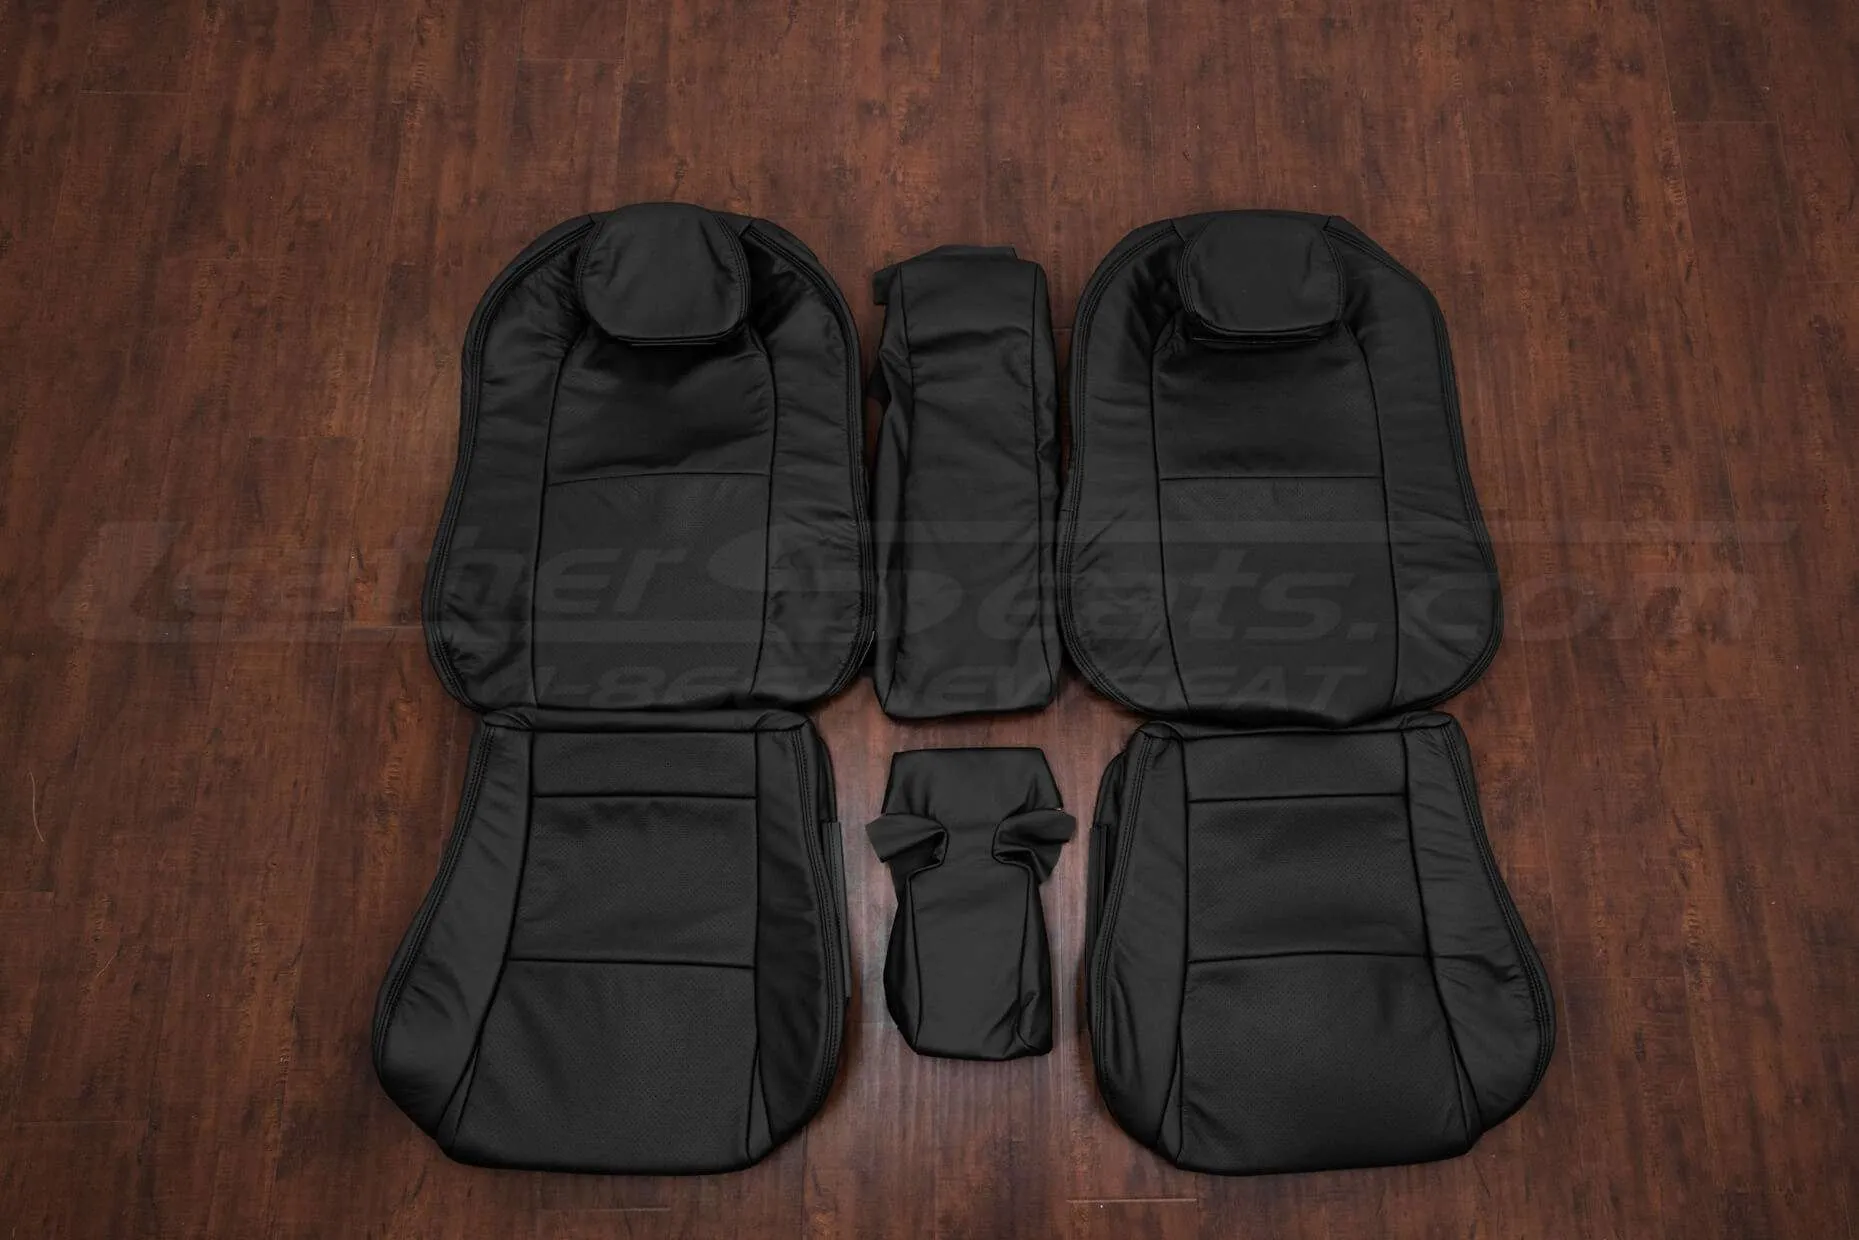 04-06 Pontiac GTO Leather Kit - Ecstasy Black - Rear seat upholstery with bolsters